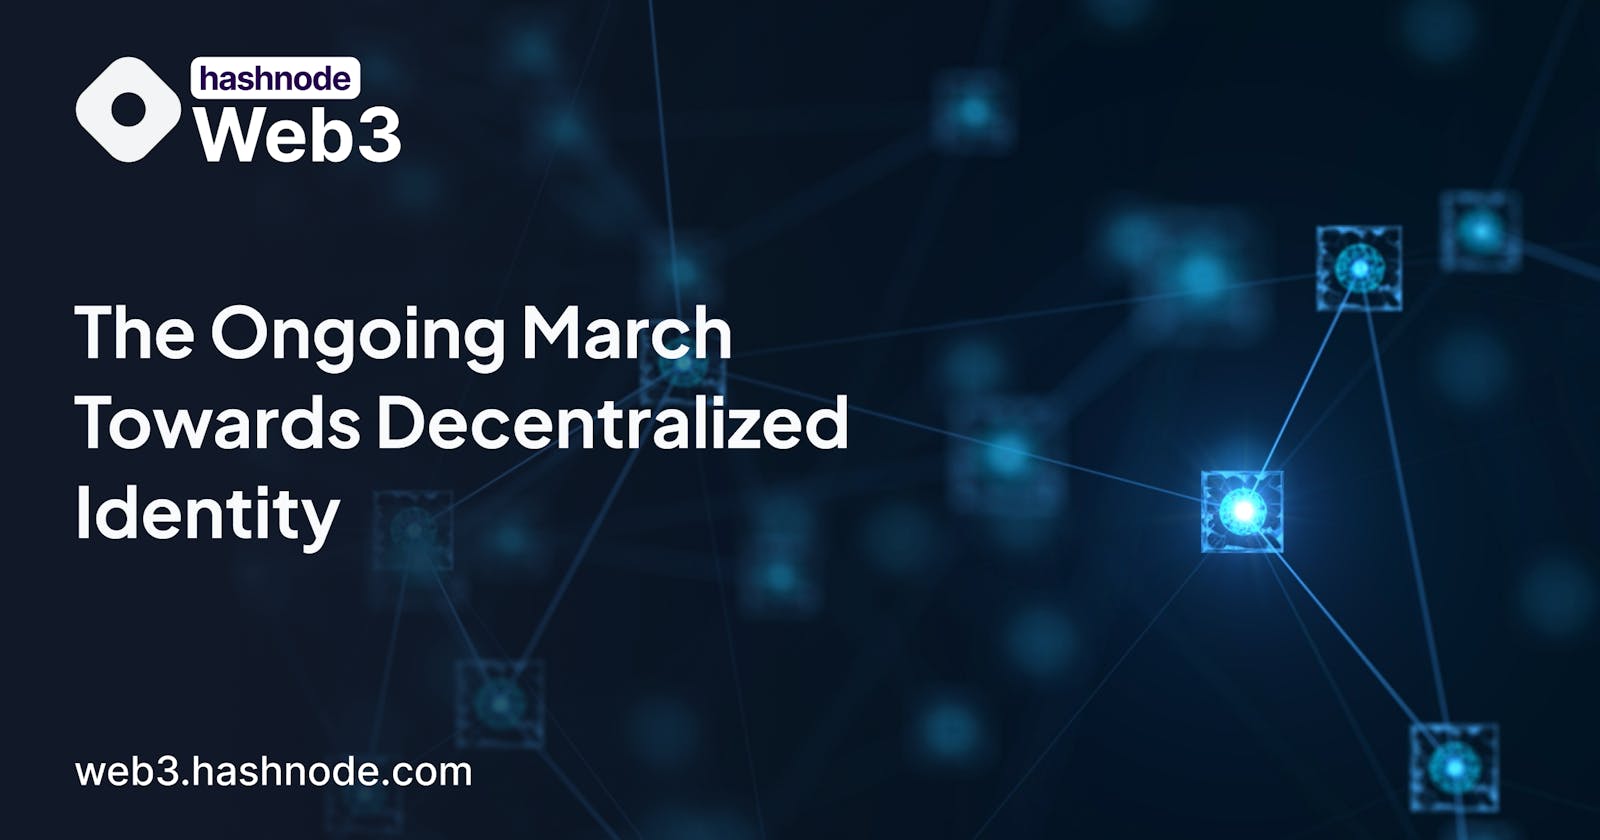 The Ongoing March Towards Decentralized Identity